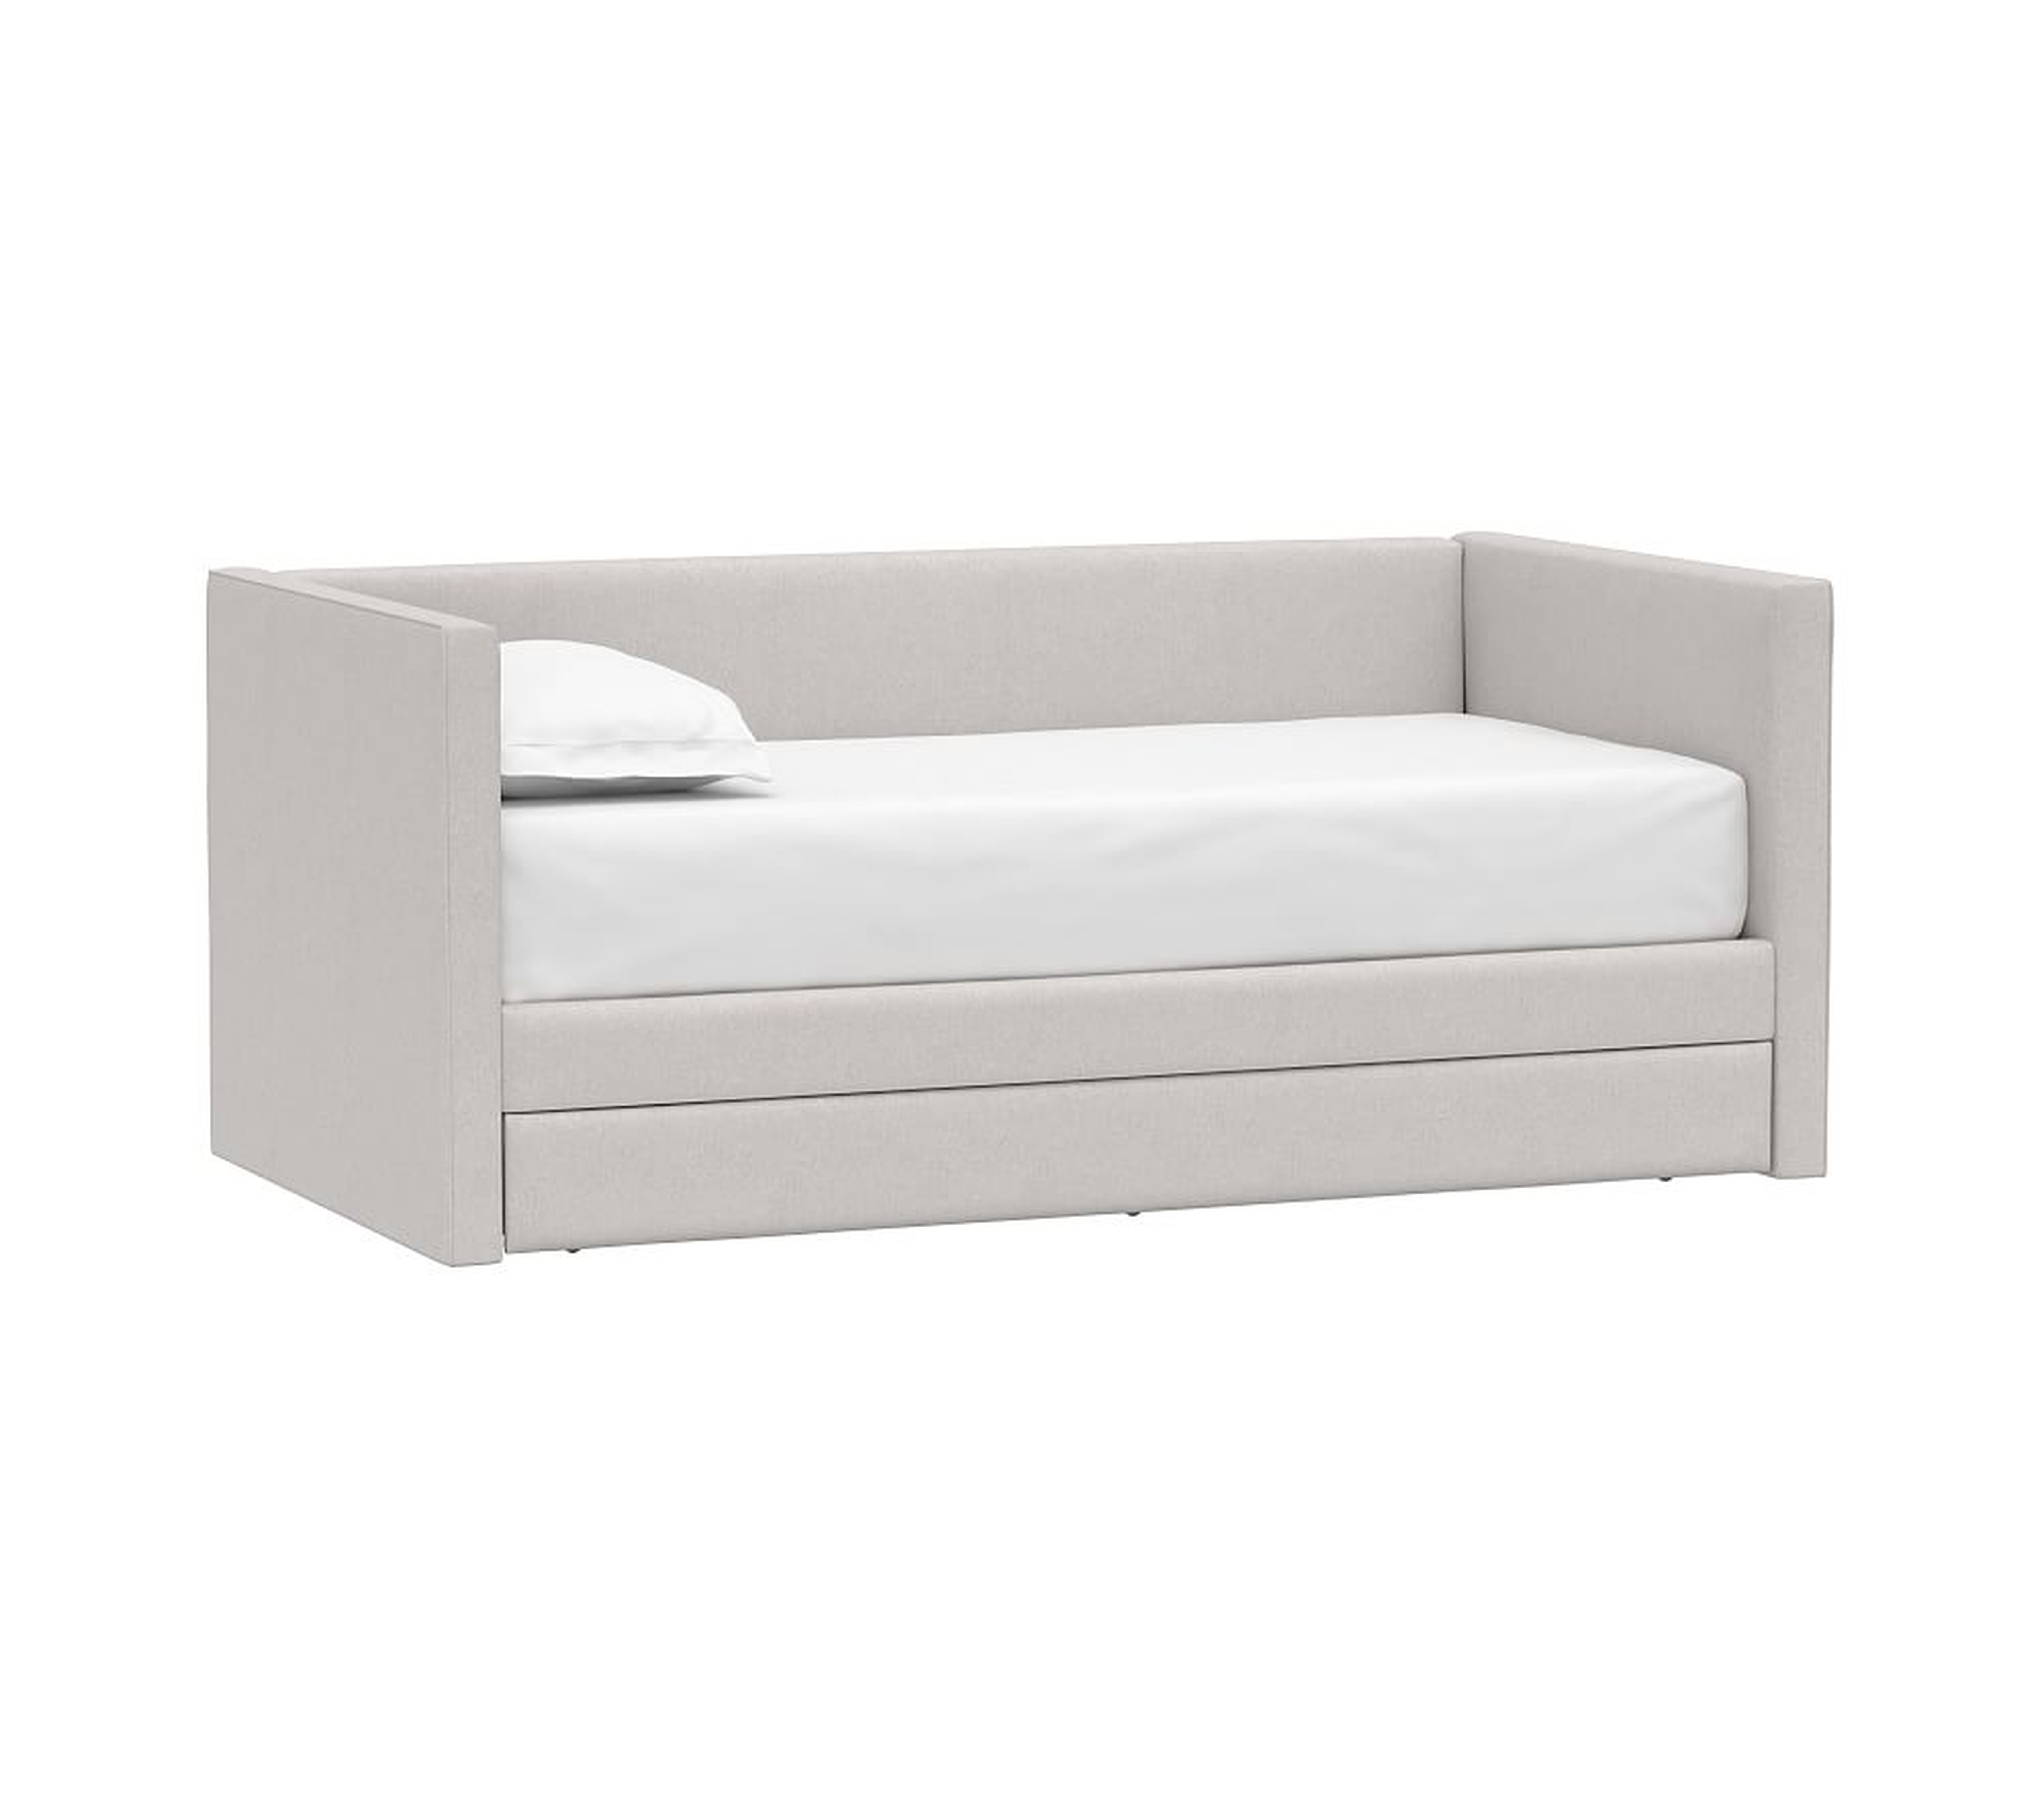 Carter Square Daybed Bed w/ Trundle, Twin, Brushed Chenille, Dove - Pottery Barn Kids